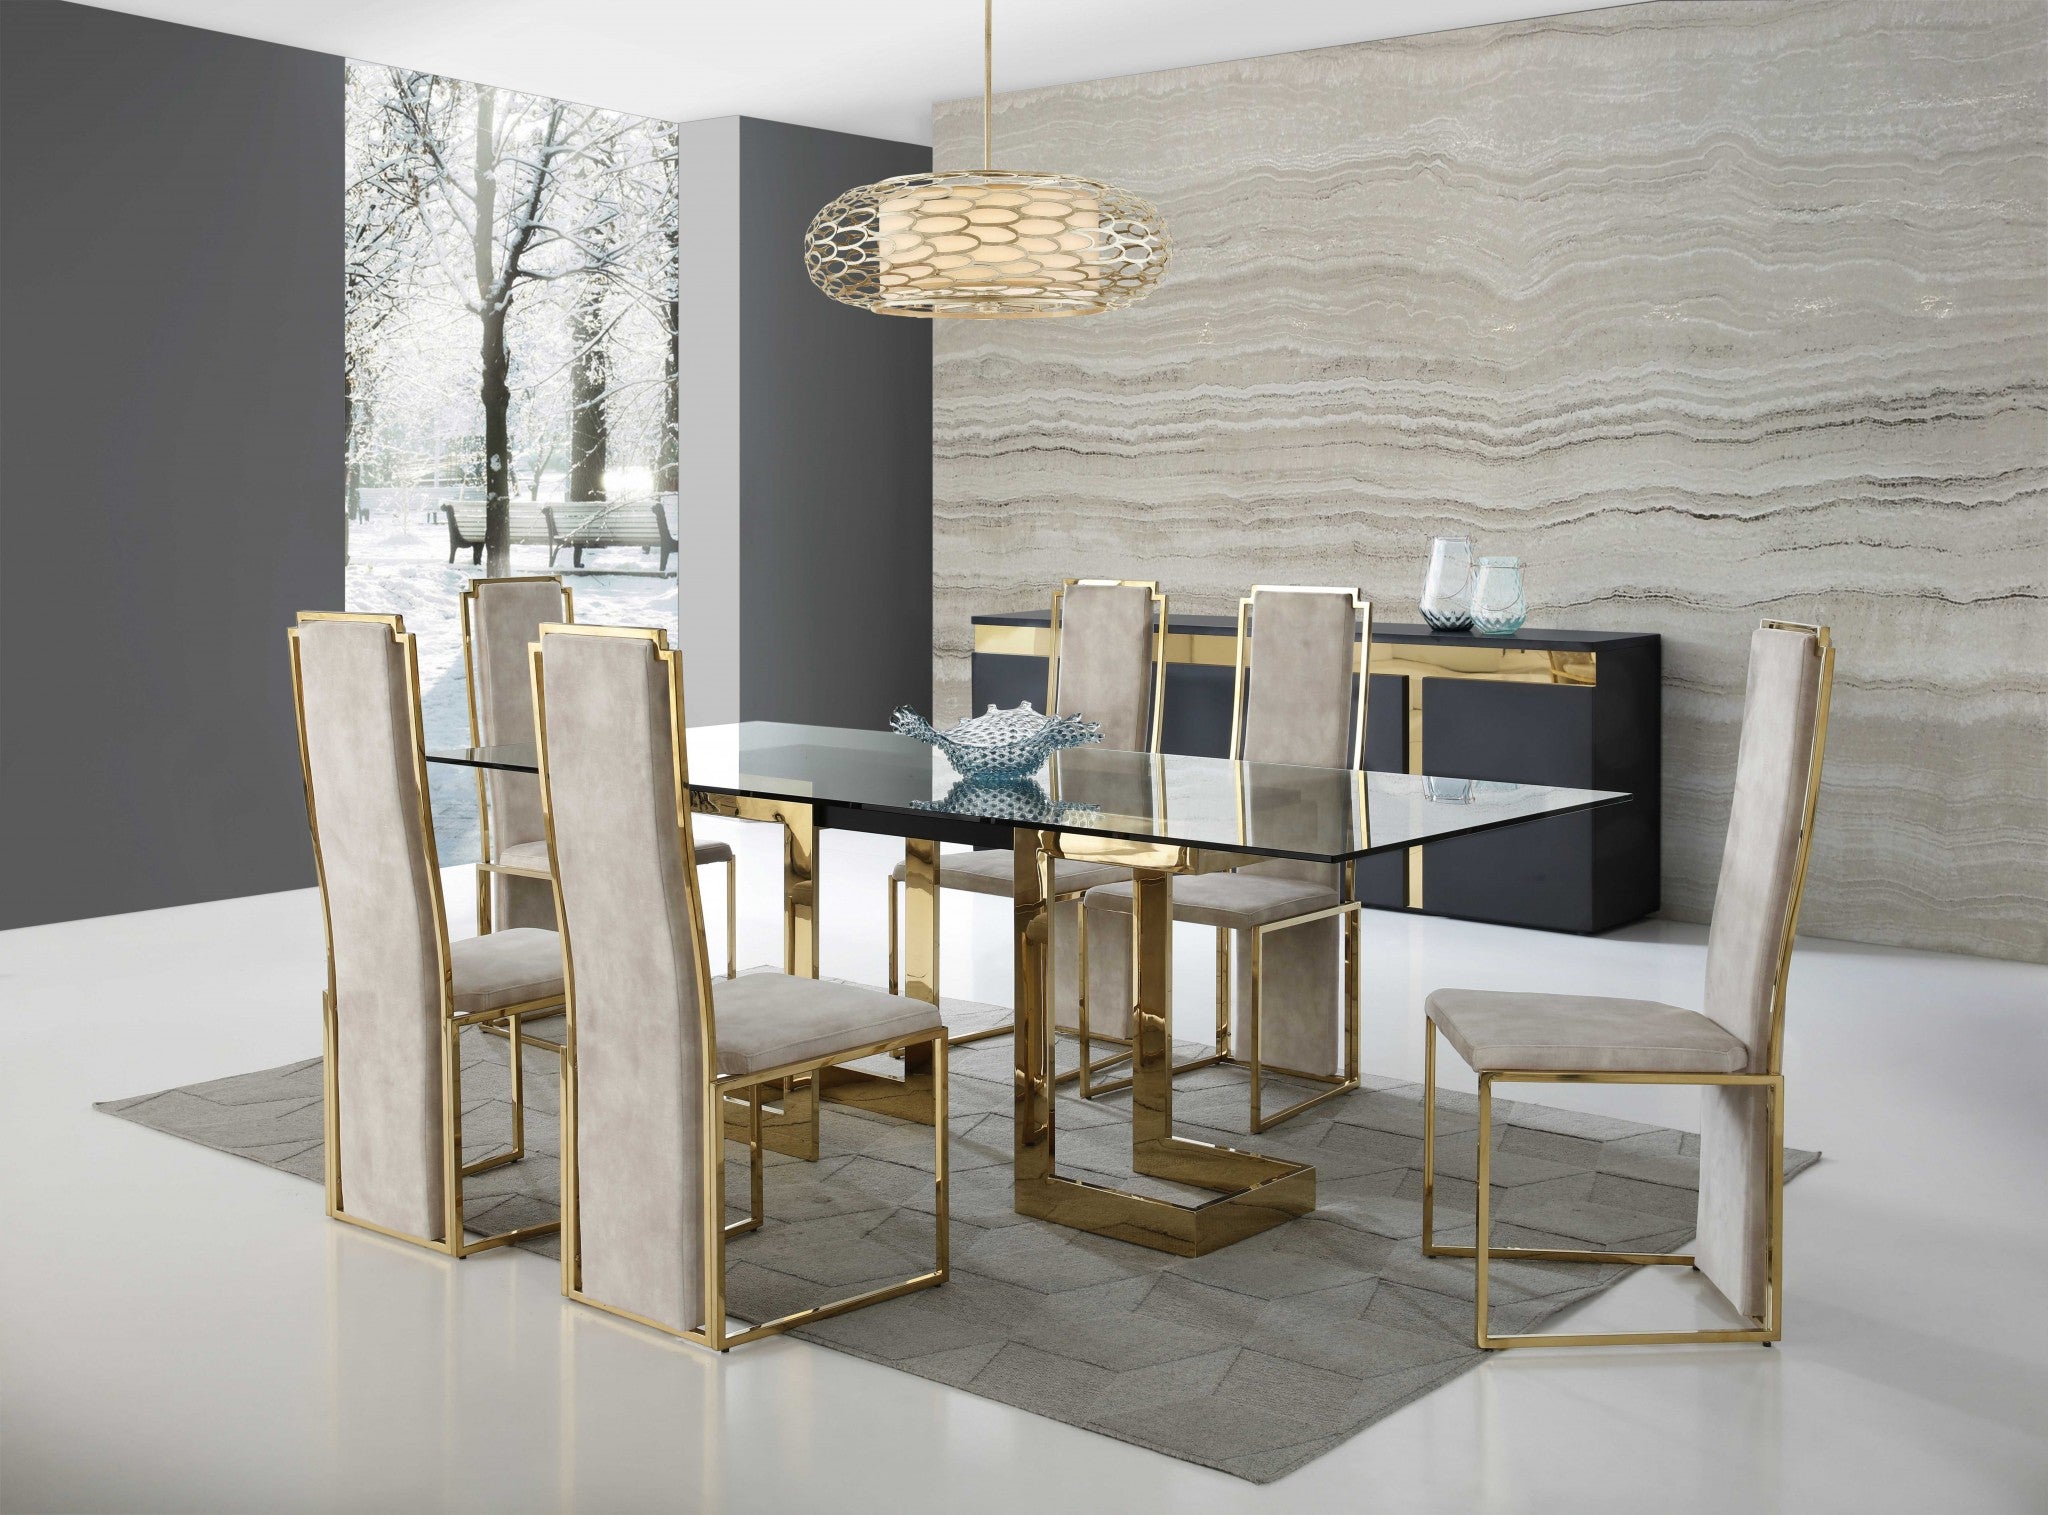 87 X 39 X 30 Polished Gold Glass Stainless Steel Dining Table